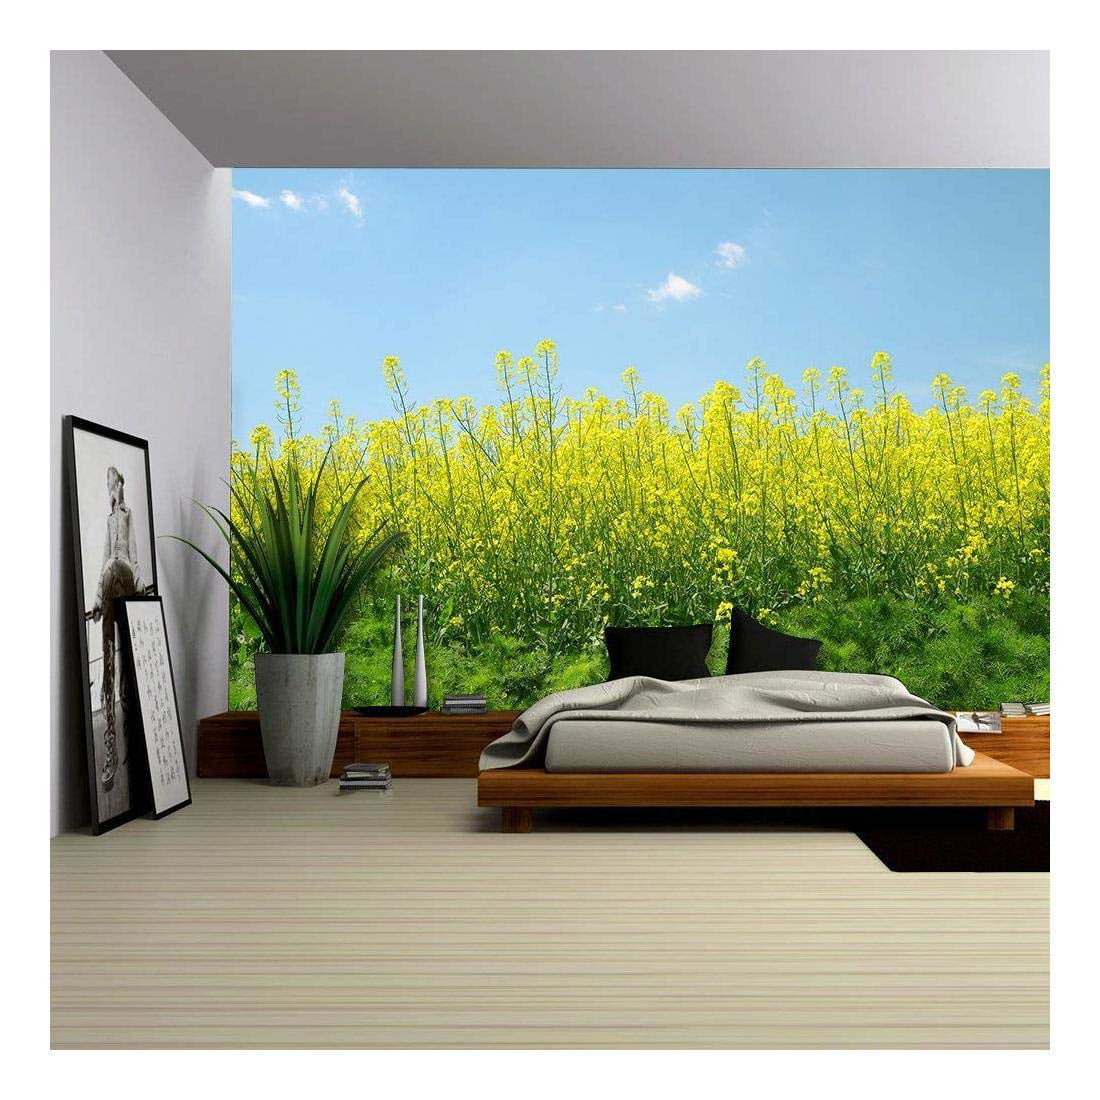 Details about   Photo wallpaper Wall mural Removable Self-adhesive Rapeseed field 